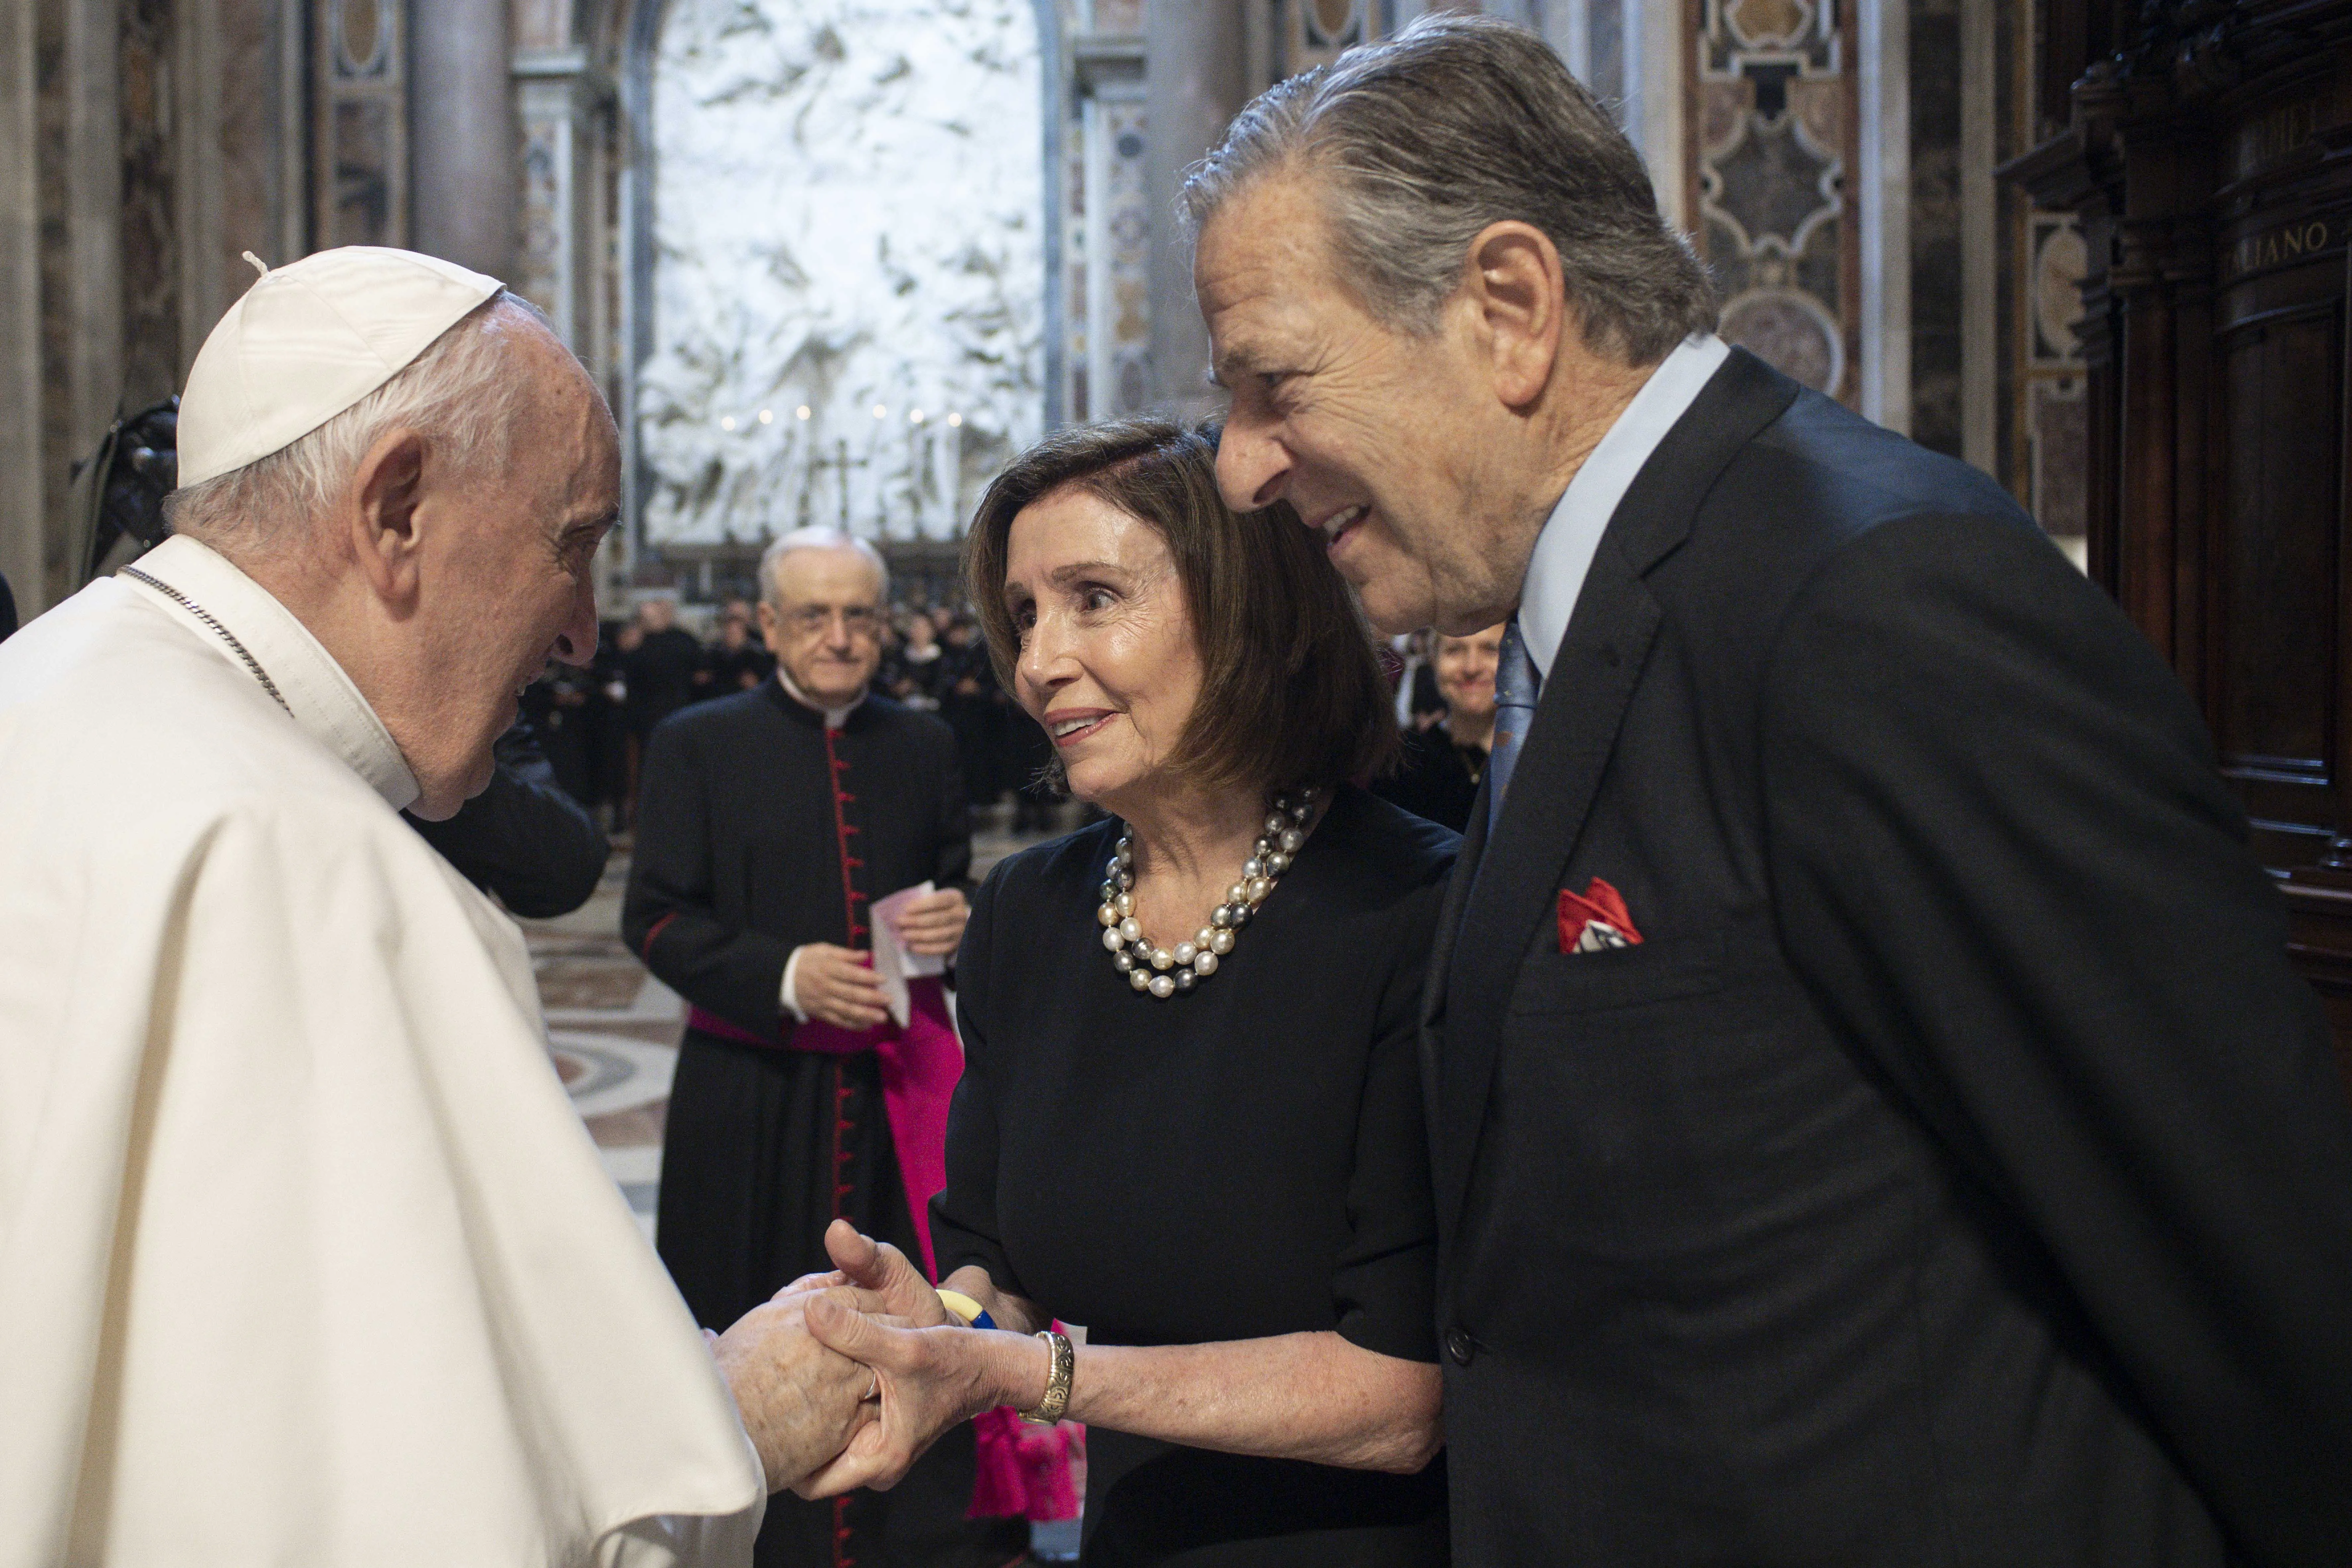 Pope Francis speaks to House Speaker Nancy Pelosi and Paul Pelosi after Mass in St. Peter's Basilica on June 29, 2022.?w=200&h=150